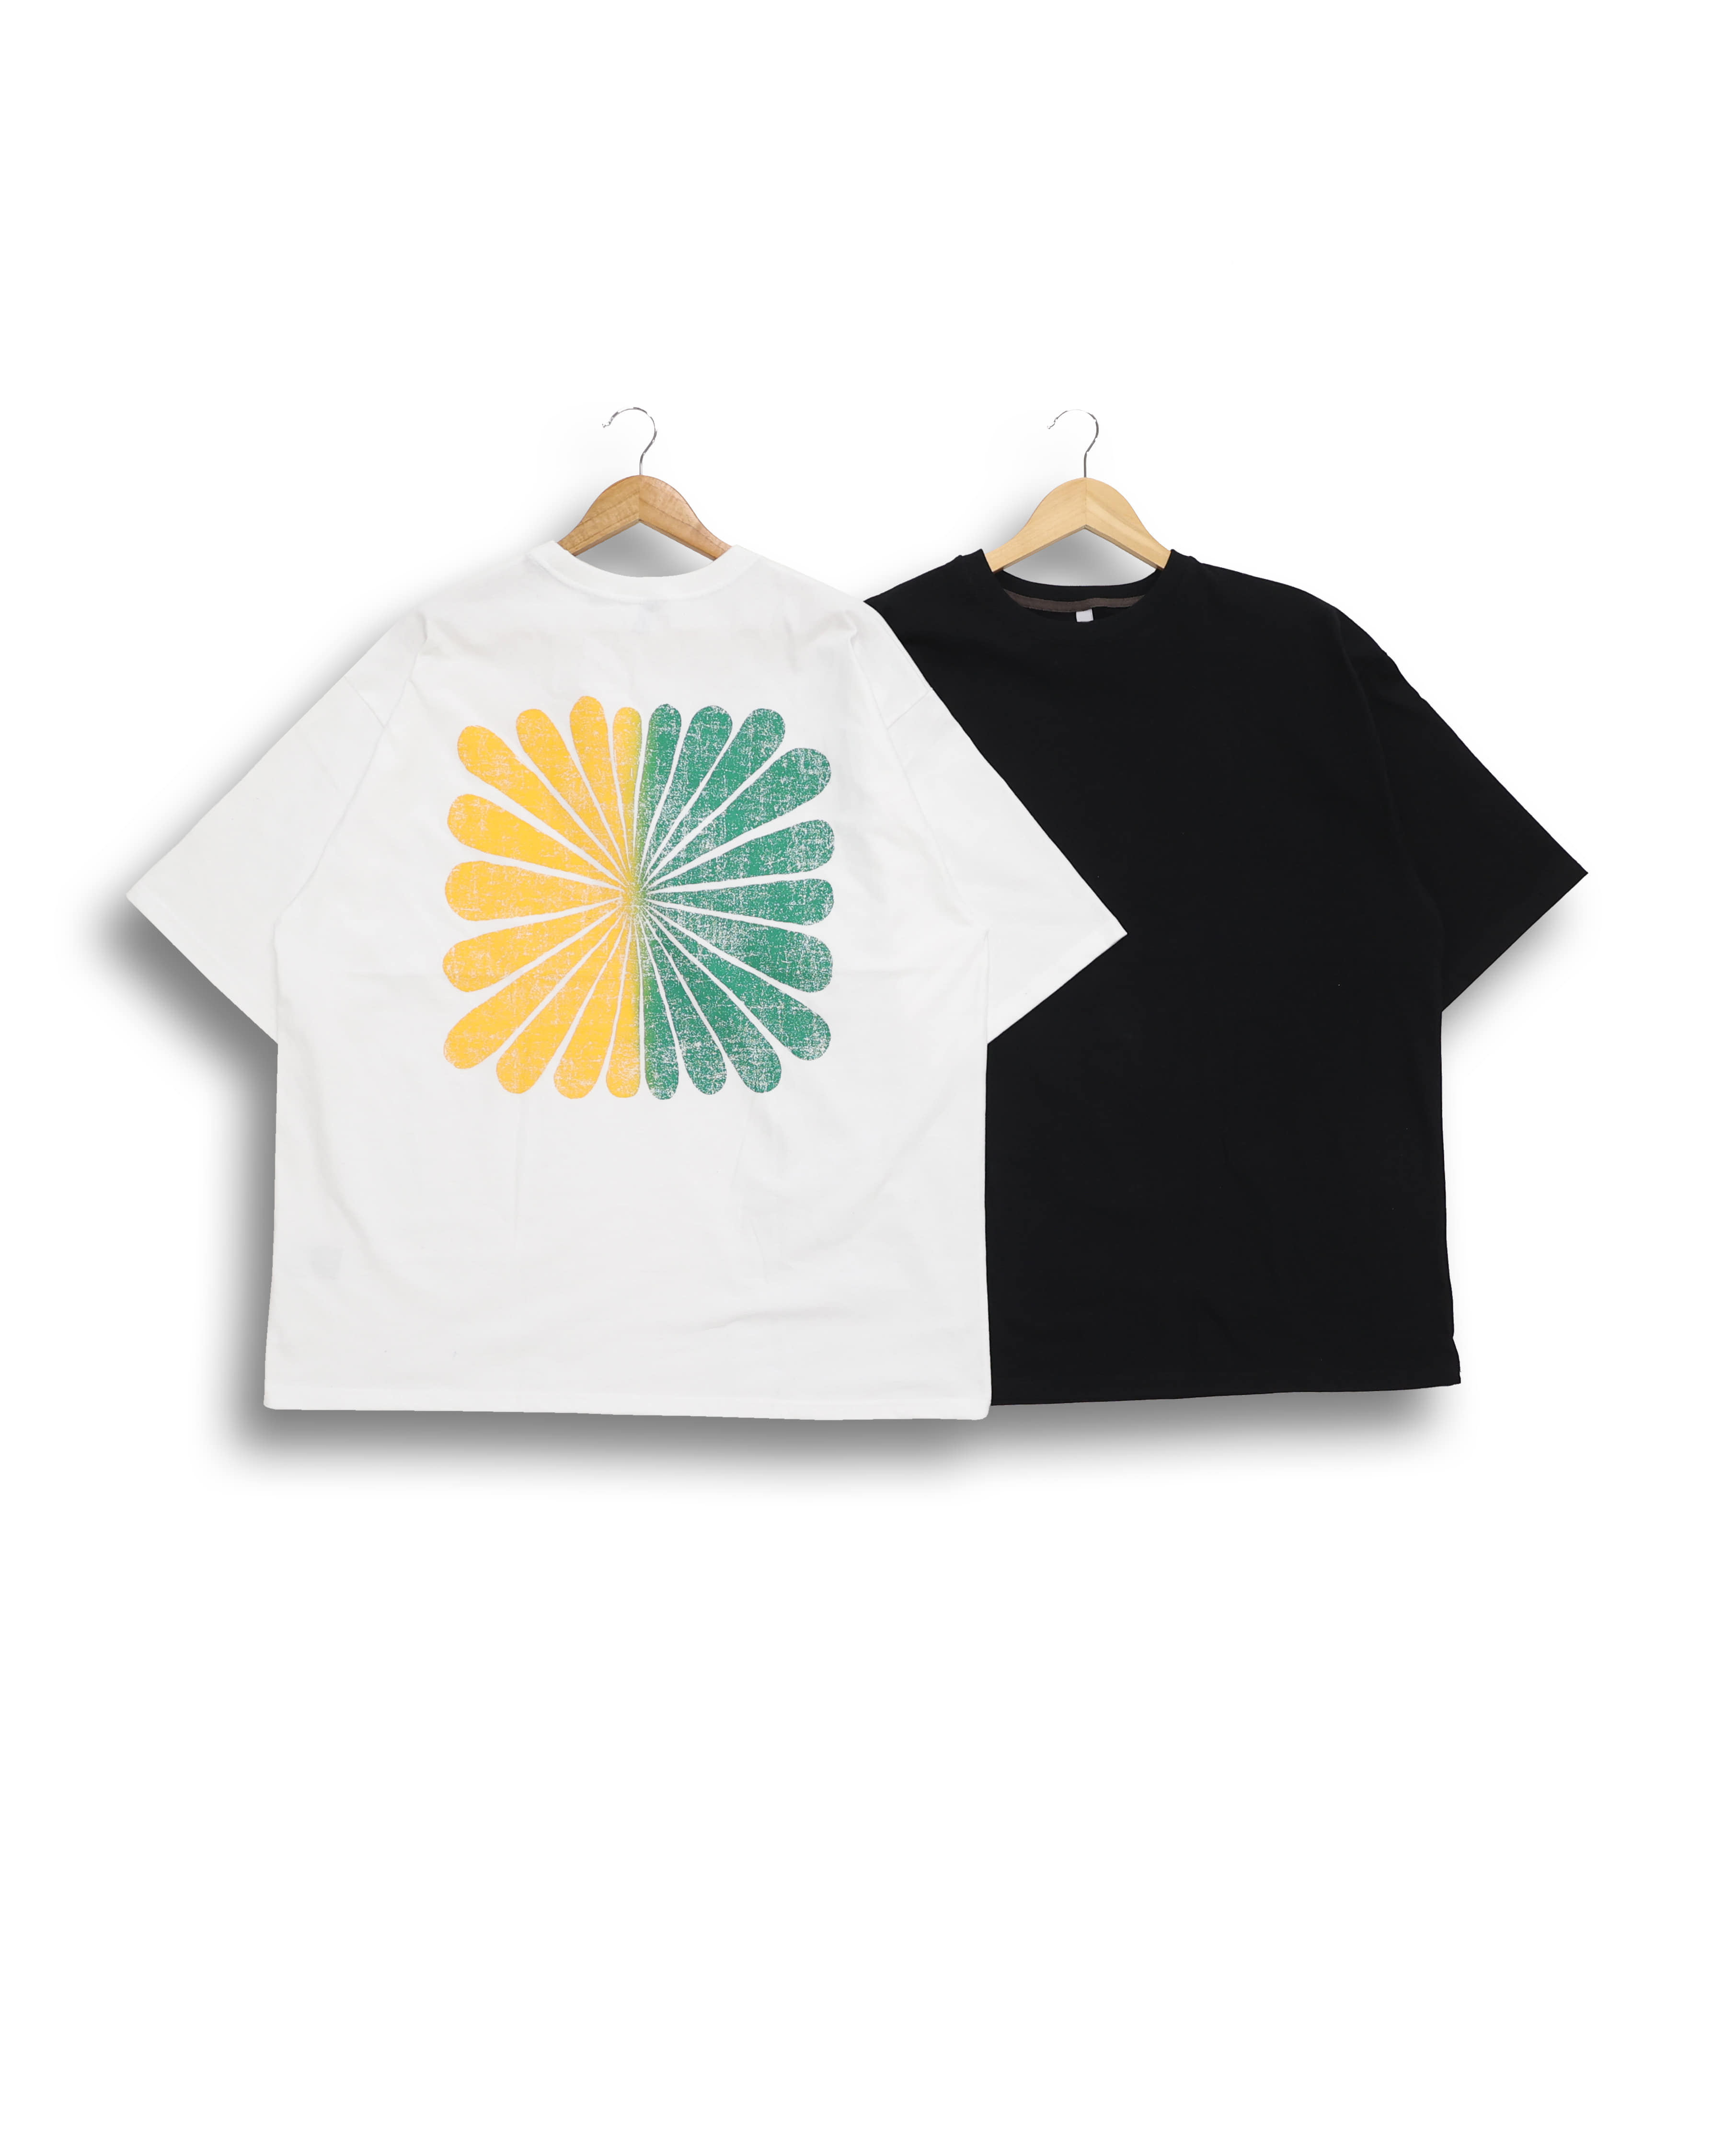 OTHER Two Tone Flower T Shirts (Black/White)